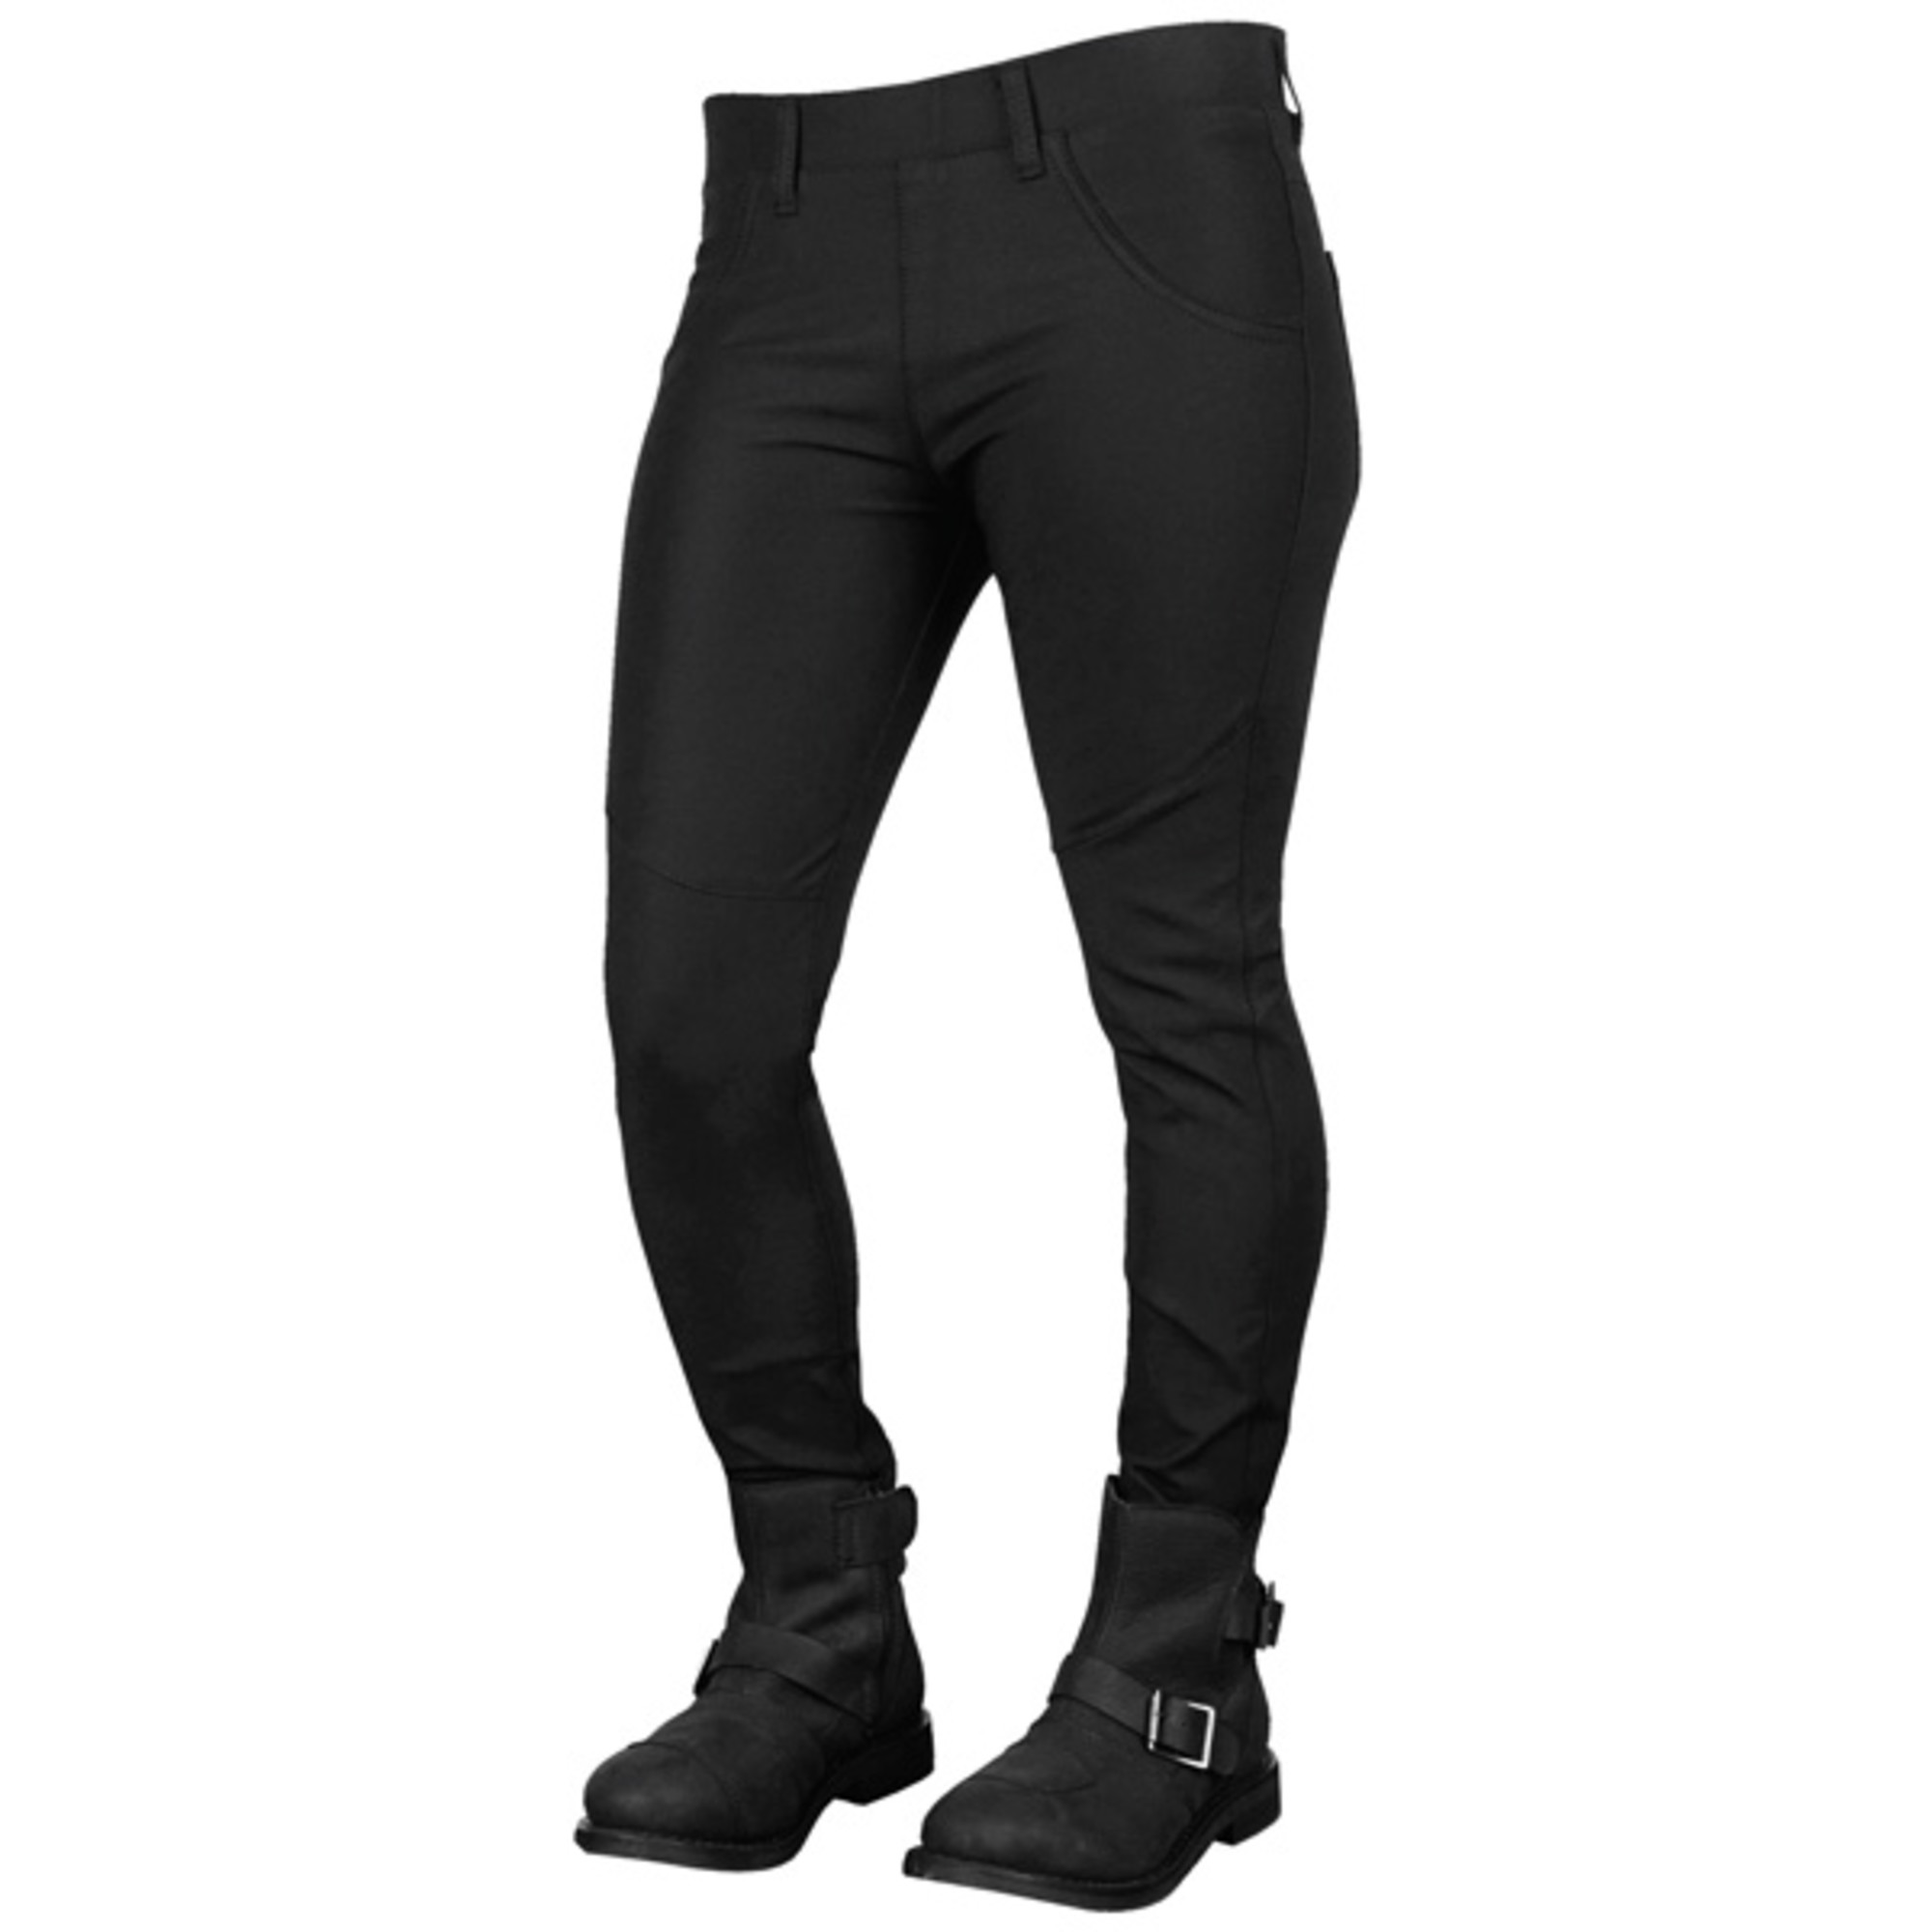 moto pantalons textile par speed and strength pour femmes comin in hot yoga